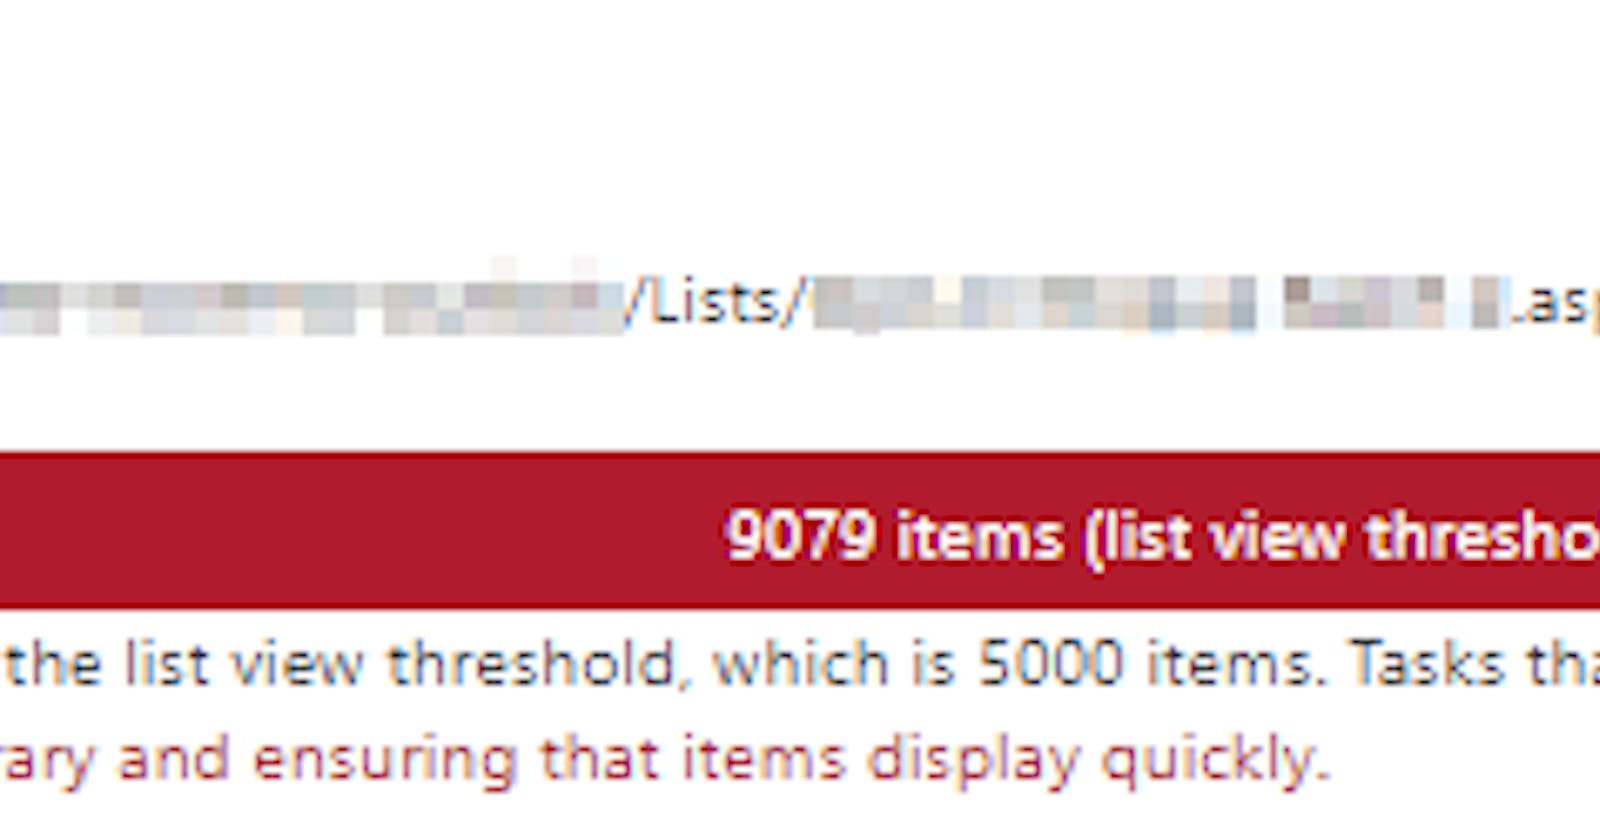 SharePoint - Bypassing 5,000 item limit via PnP